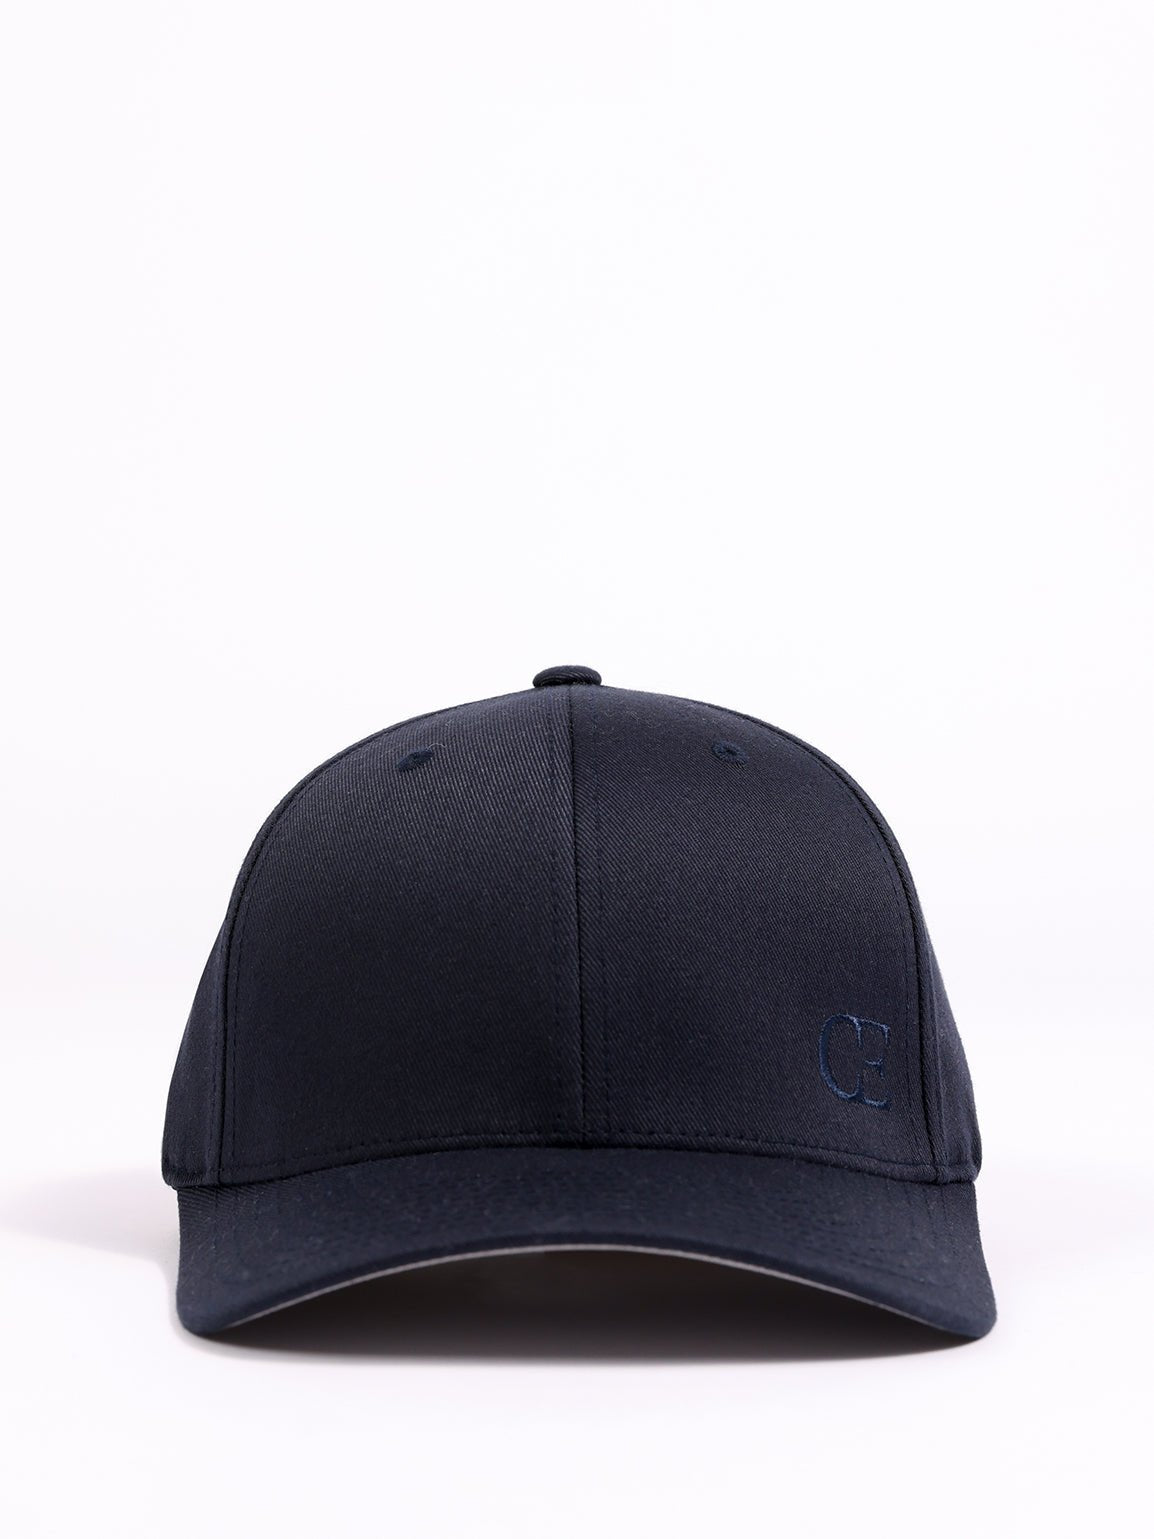 Navy urban classic hat with white background 